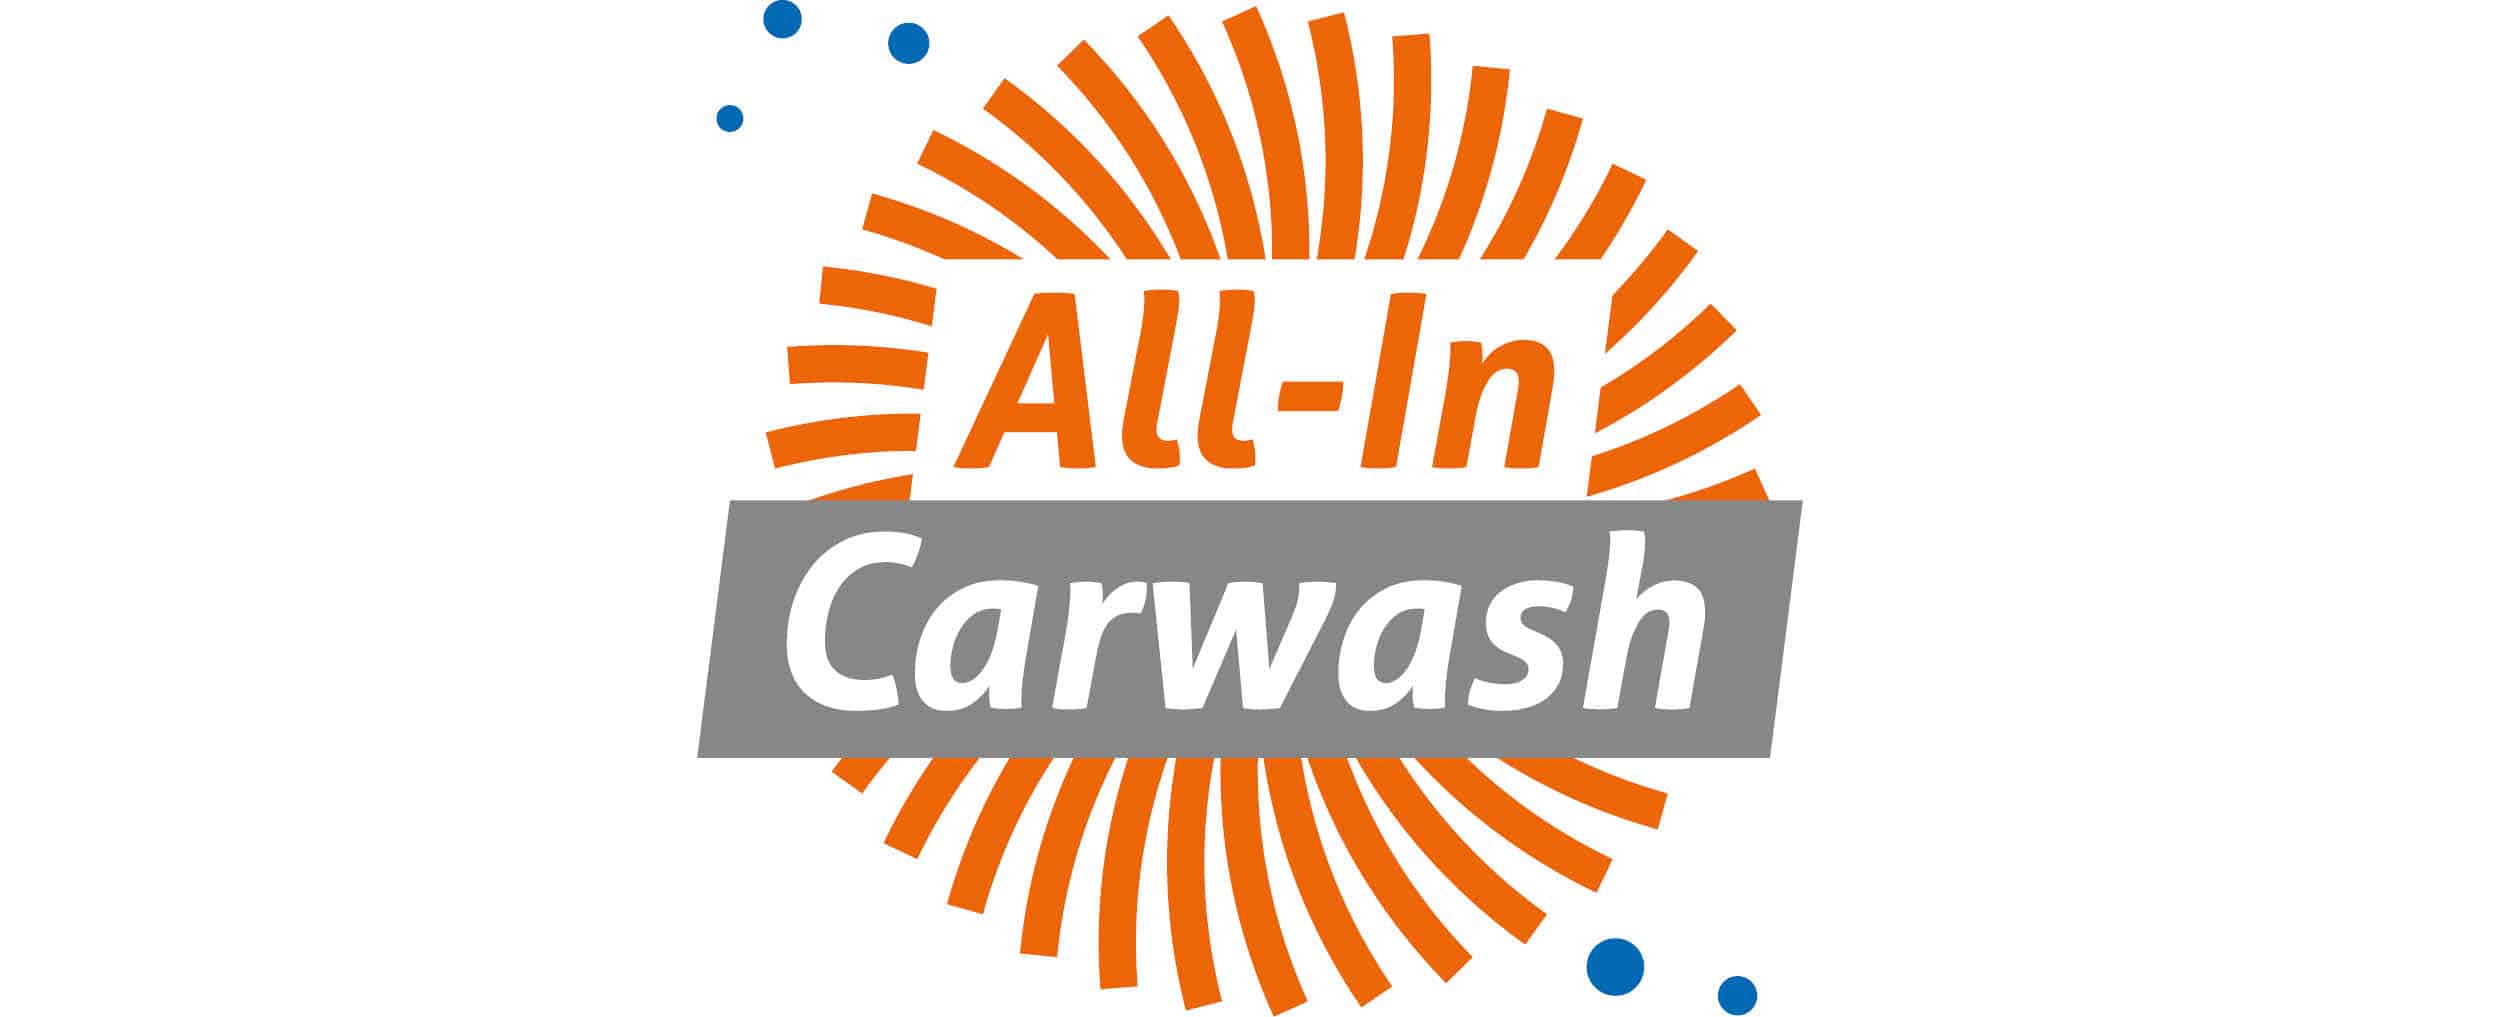 ALL-IN CARWASH